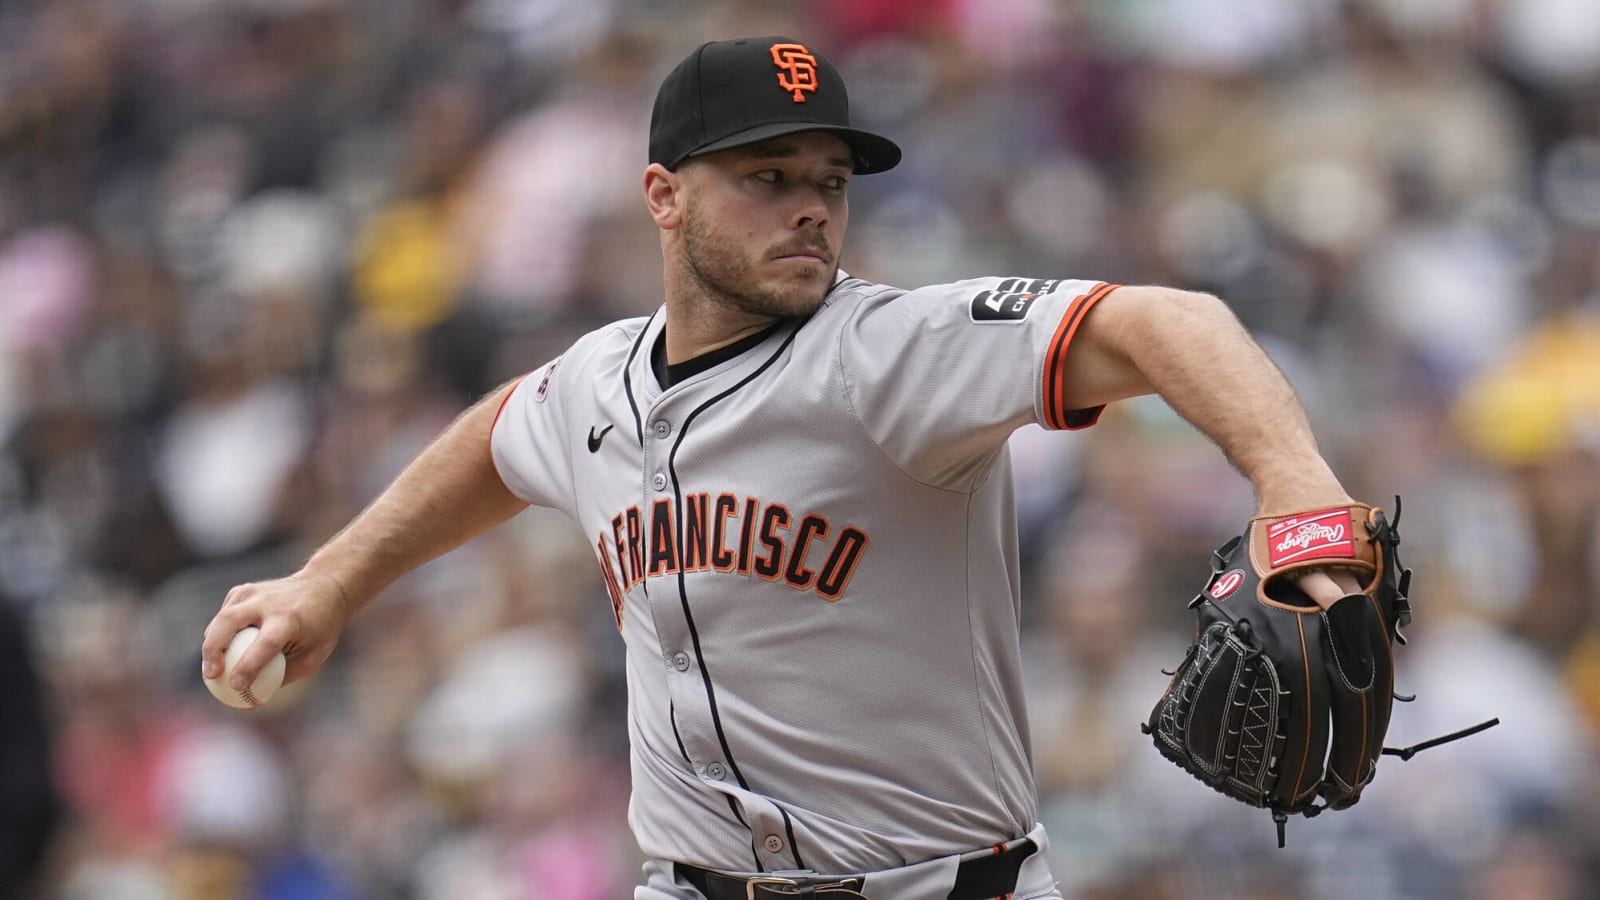 Pirates acquire potential rotation arm from Giants